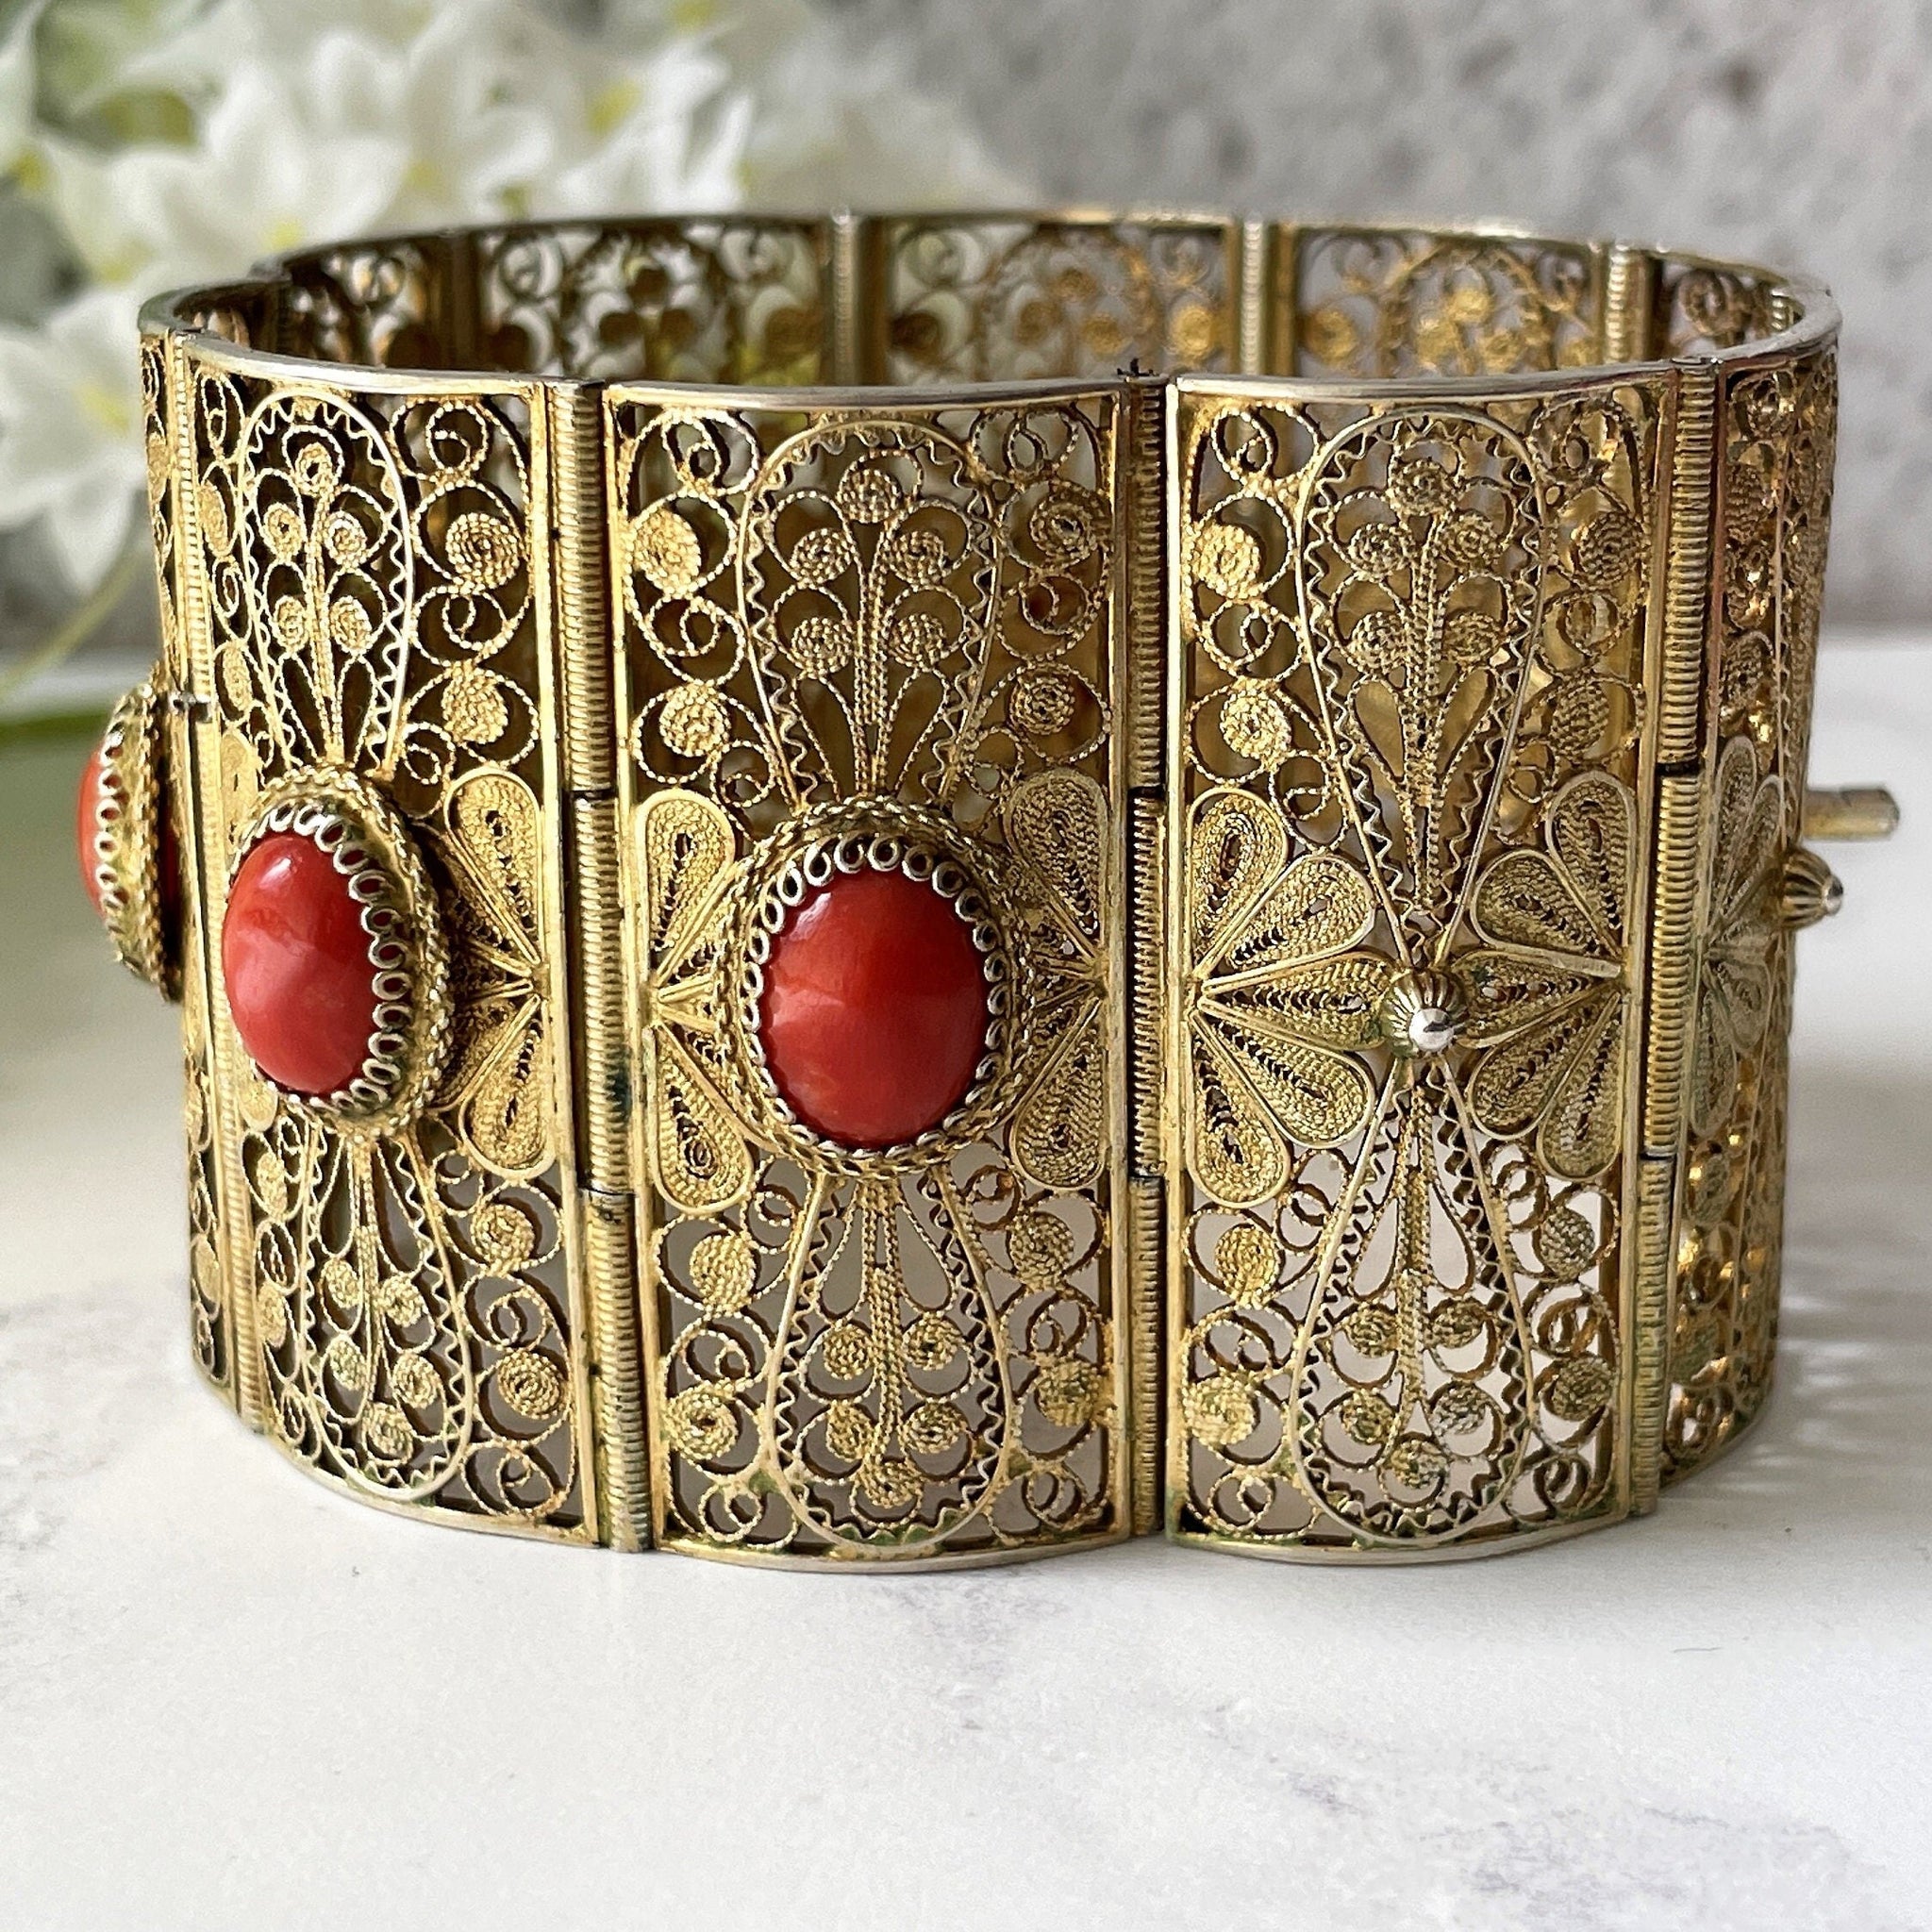 Antique Victorian Red Coral 3 Row Beaded Bangle Bracelet | eBay